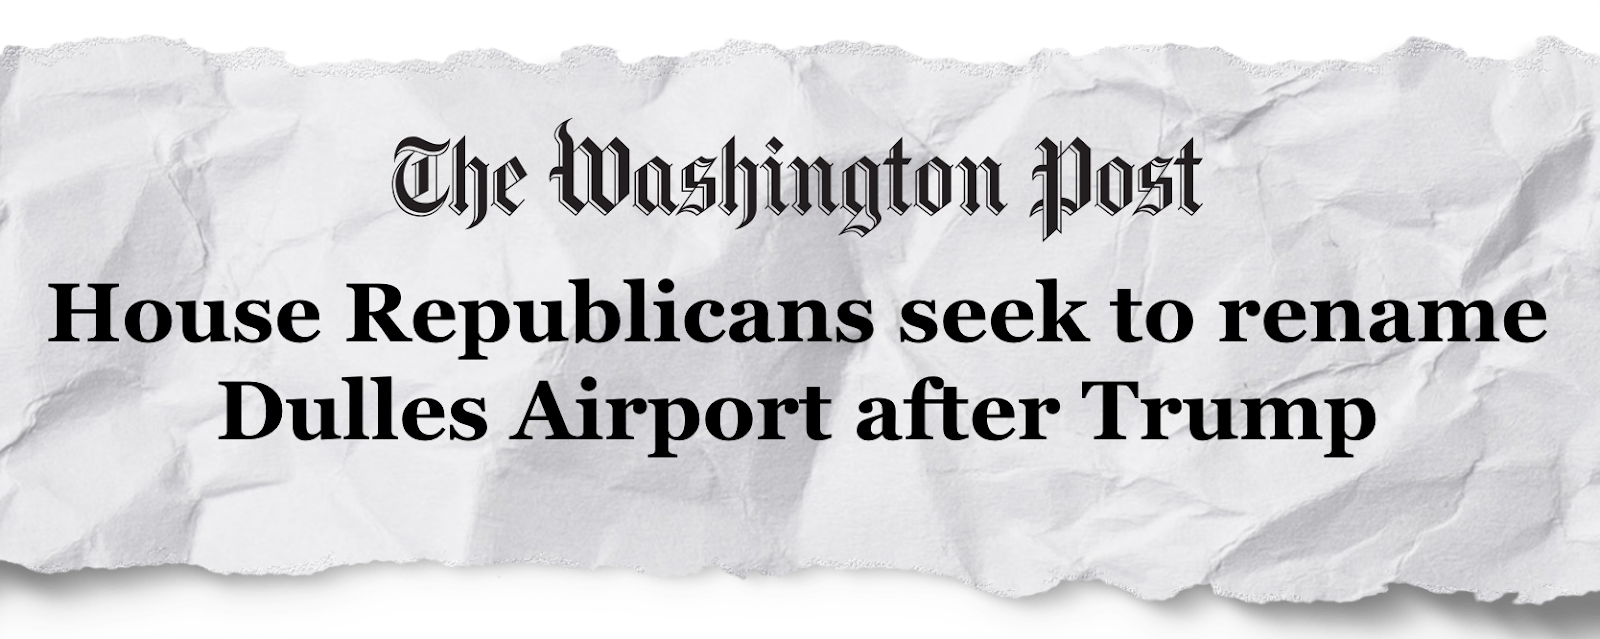 The Washington Post: "House Republicans seek to rename Dulles Airport after Trump"